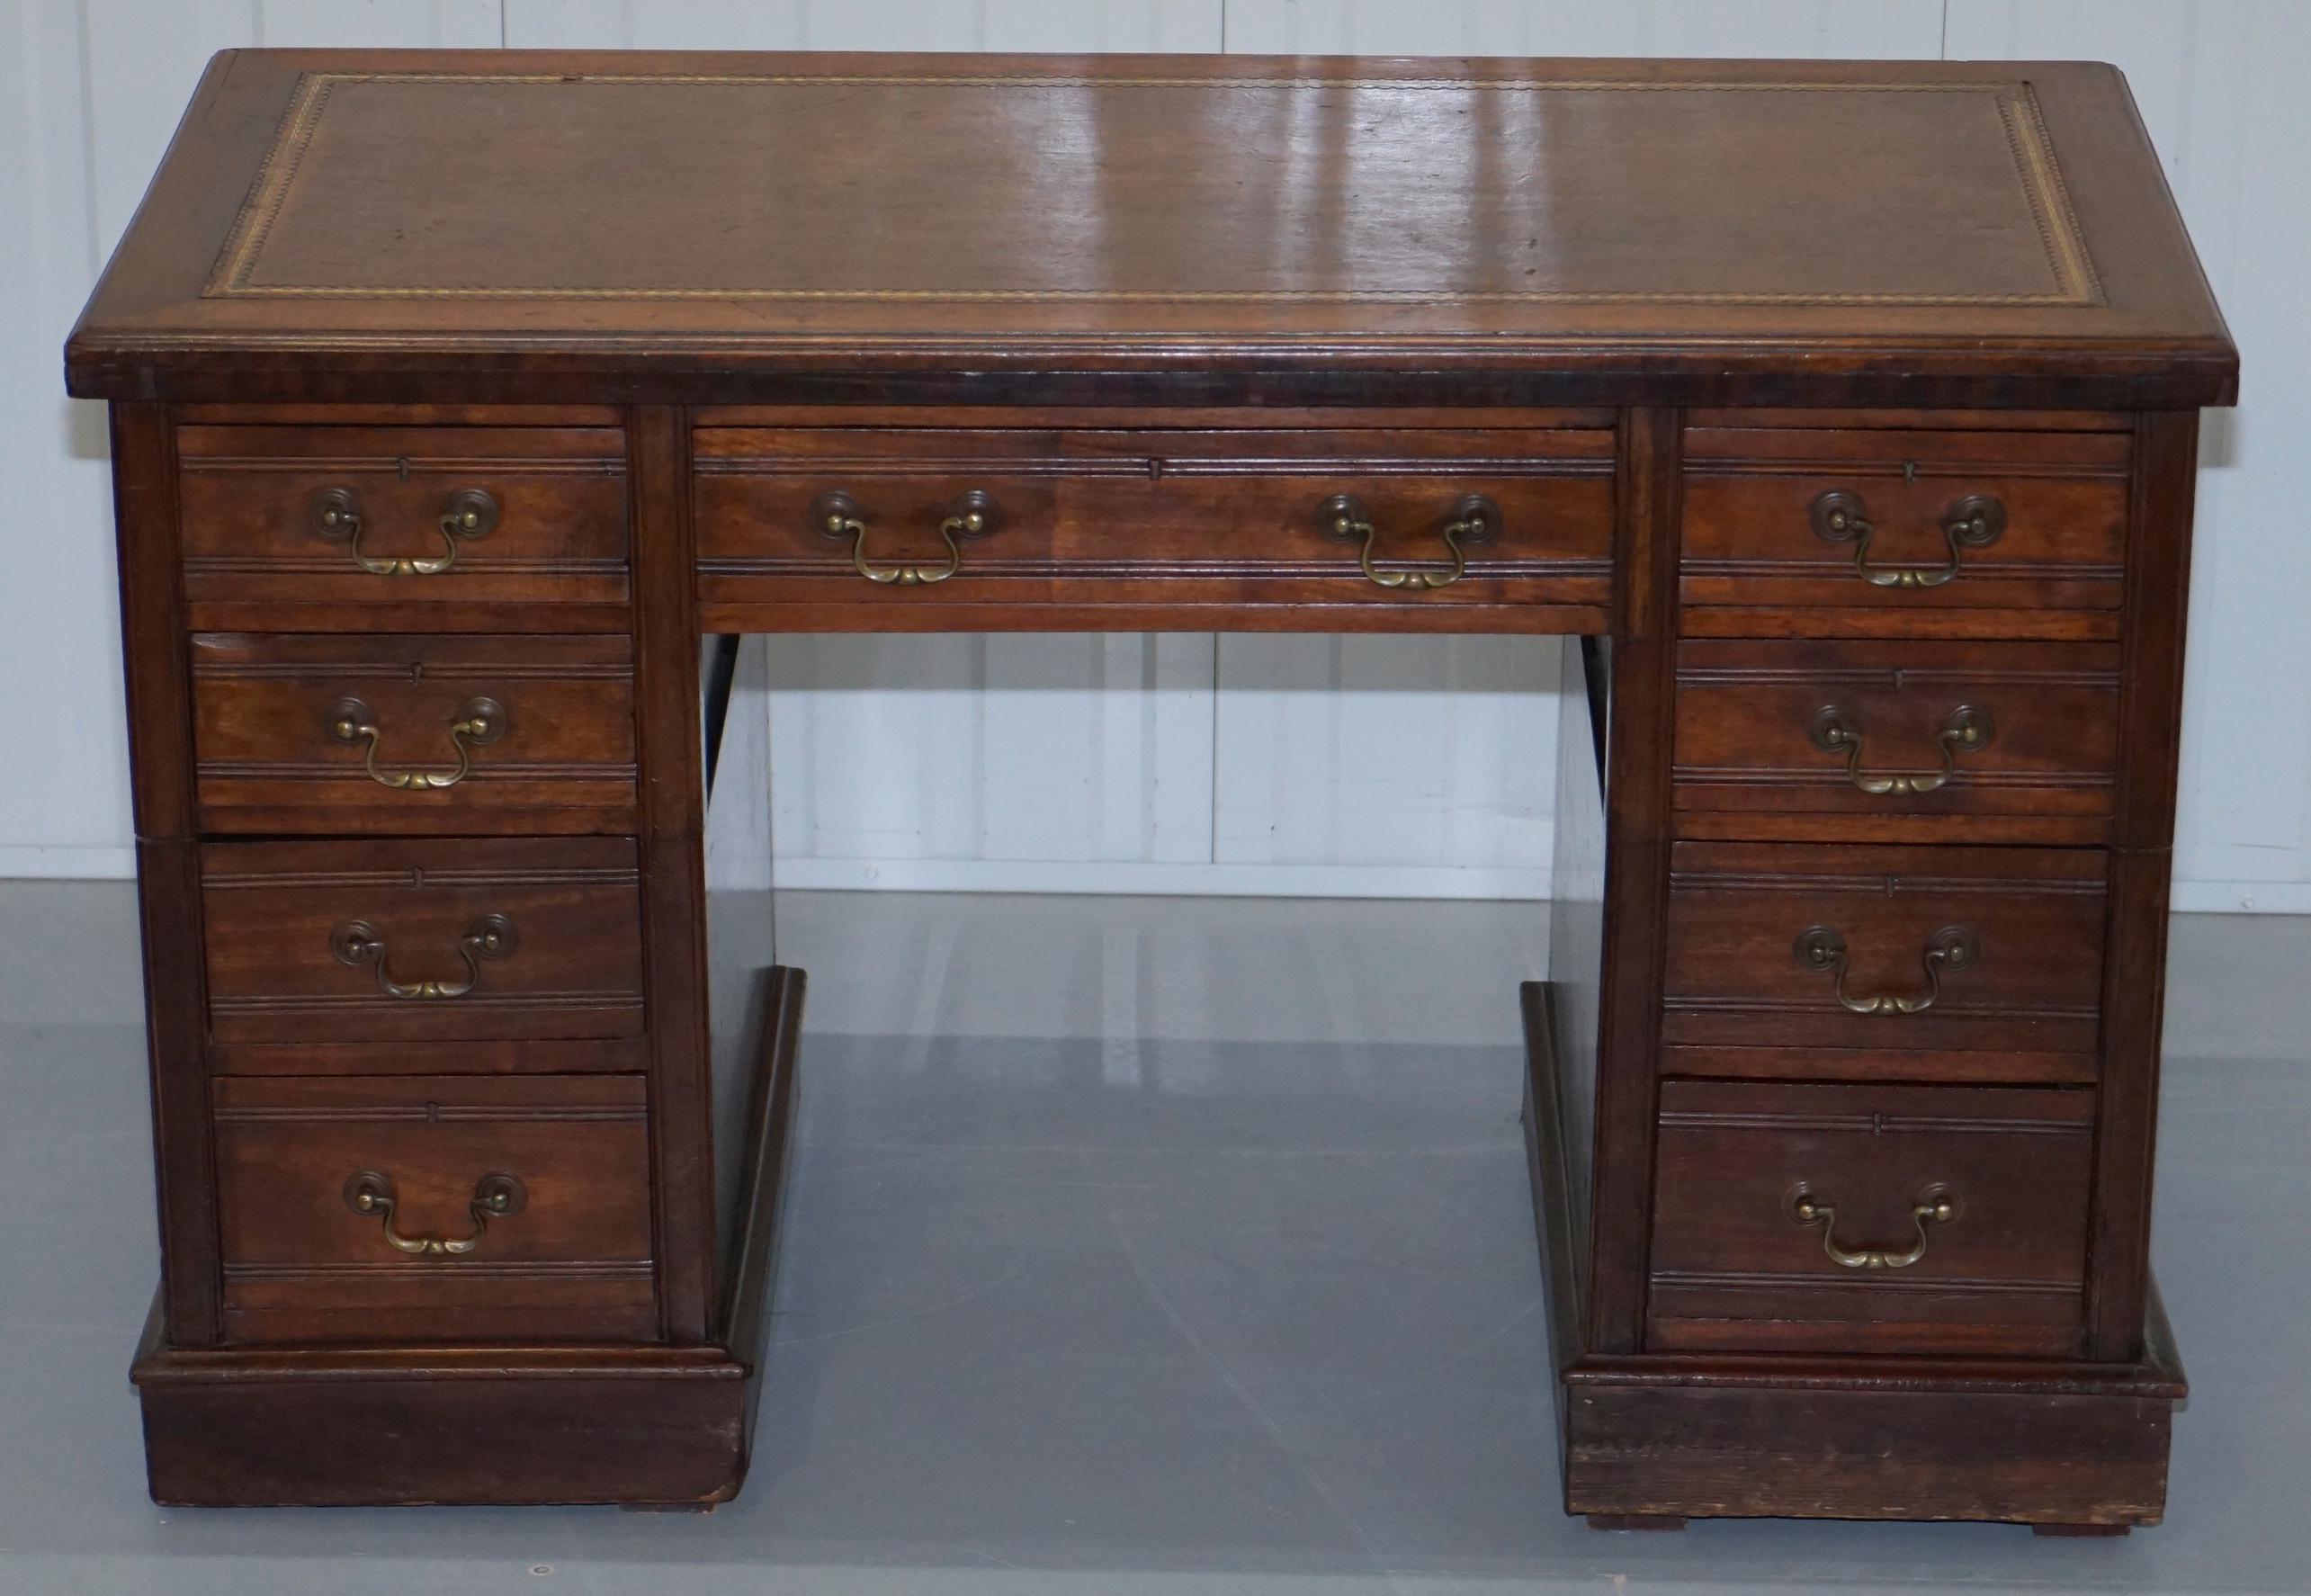 We are delighted to offer for auction this lovely handmade in England solid Mahogany Victorian twin pedestal partner desk

A well used good-looking handmade piece, at some point the pedestals look to have been cut in half and then reattached, they